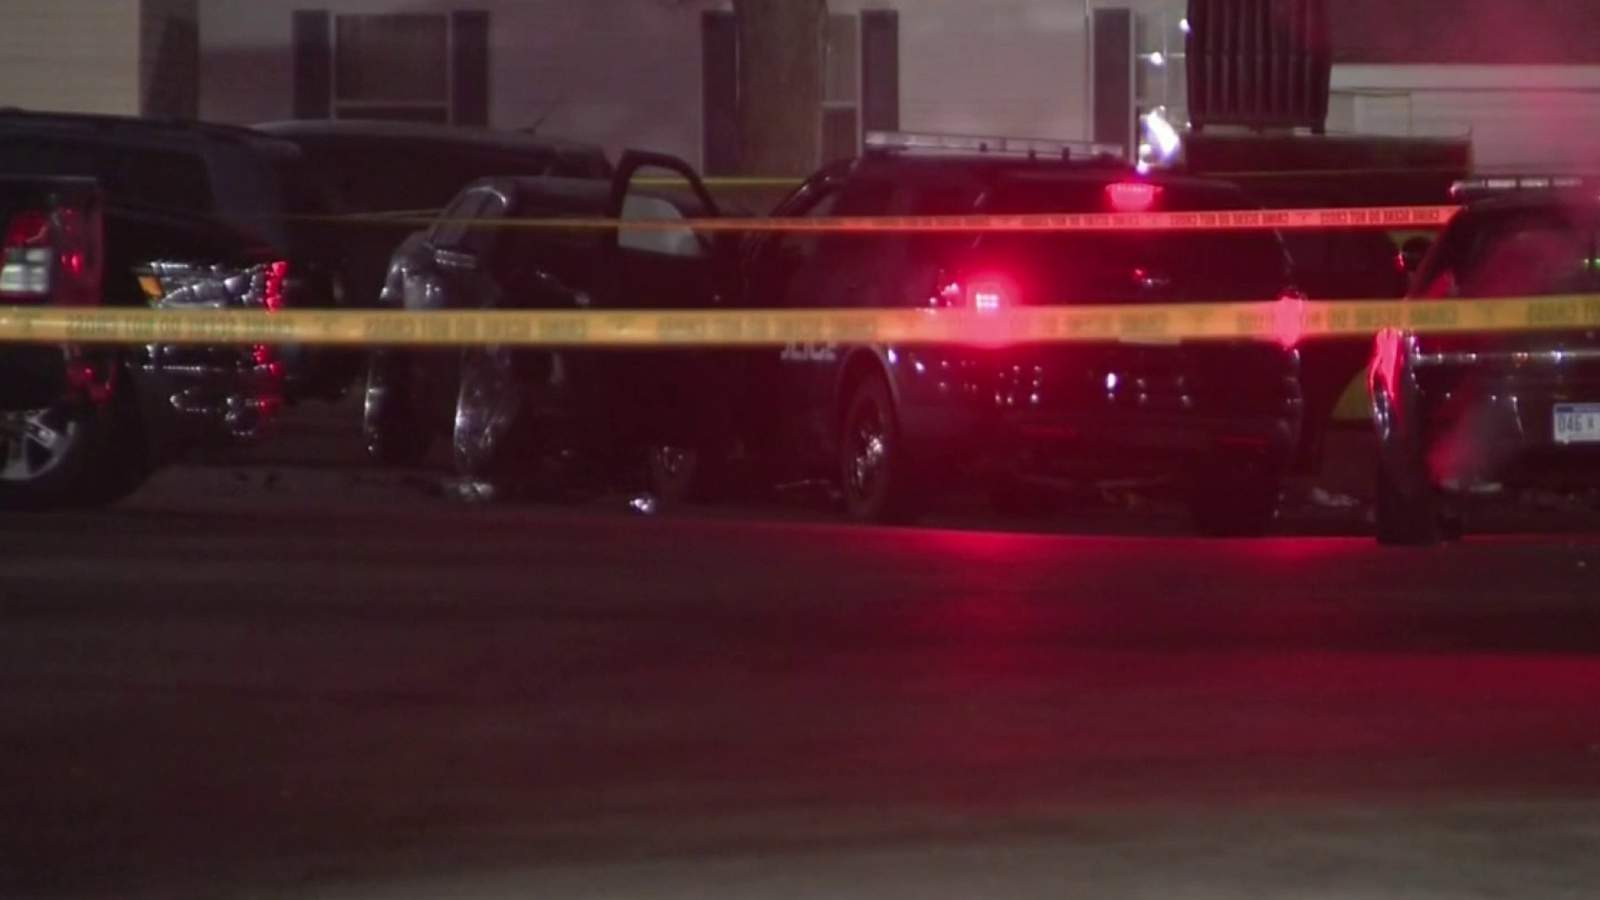 Burglary suspect in critical condition after being shot by police in Madison Heights